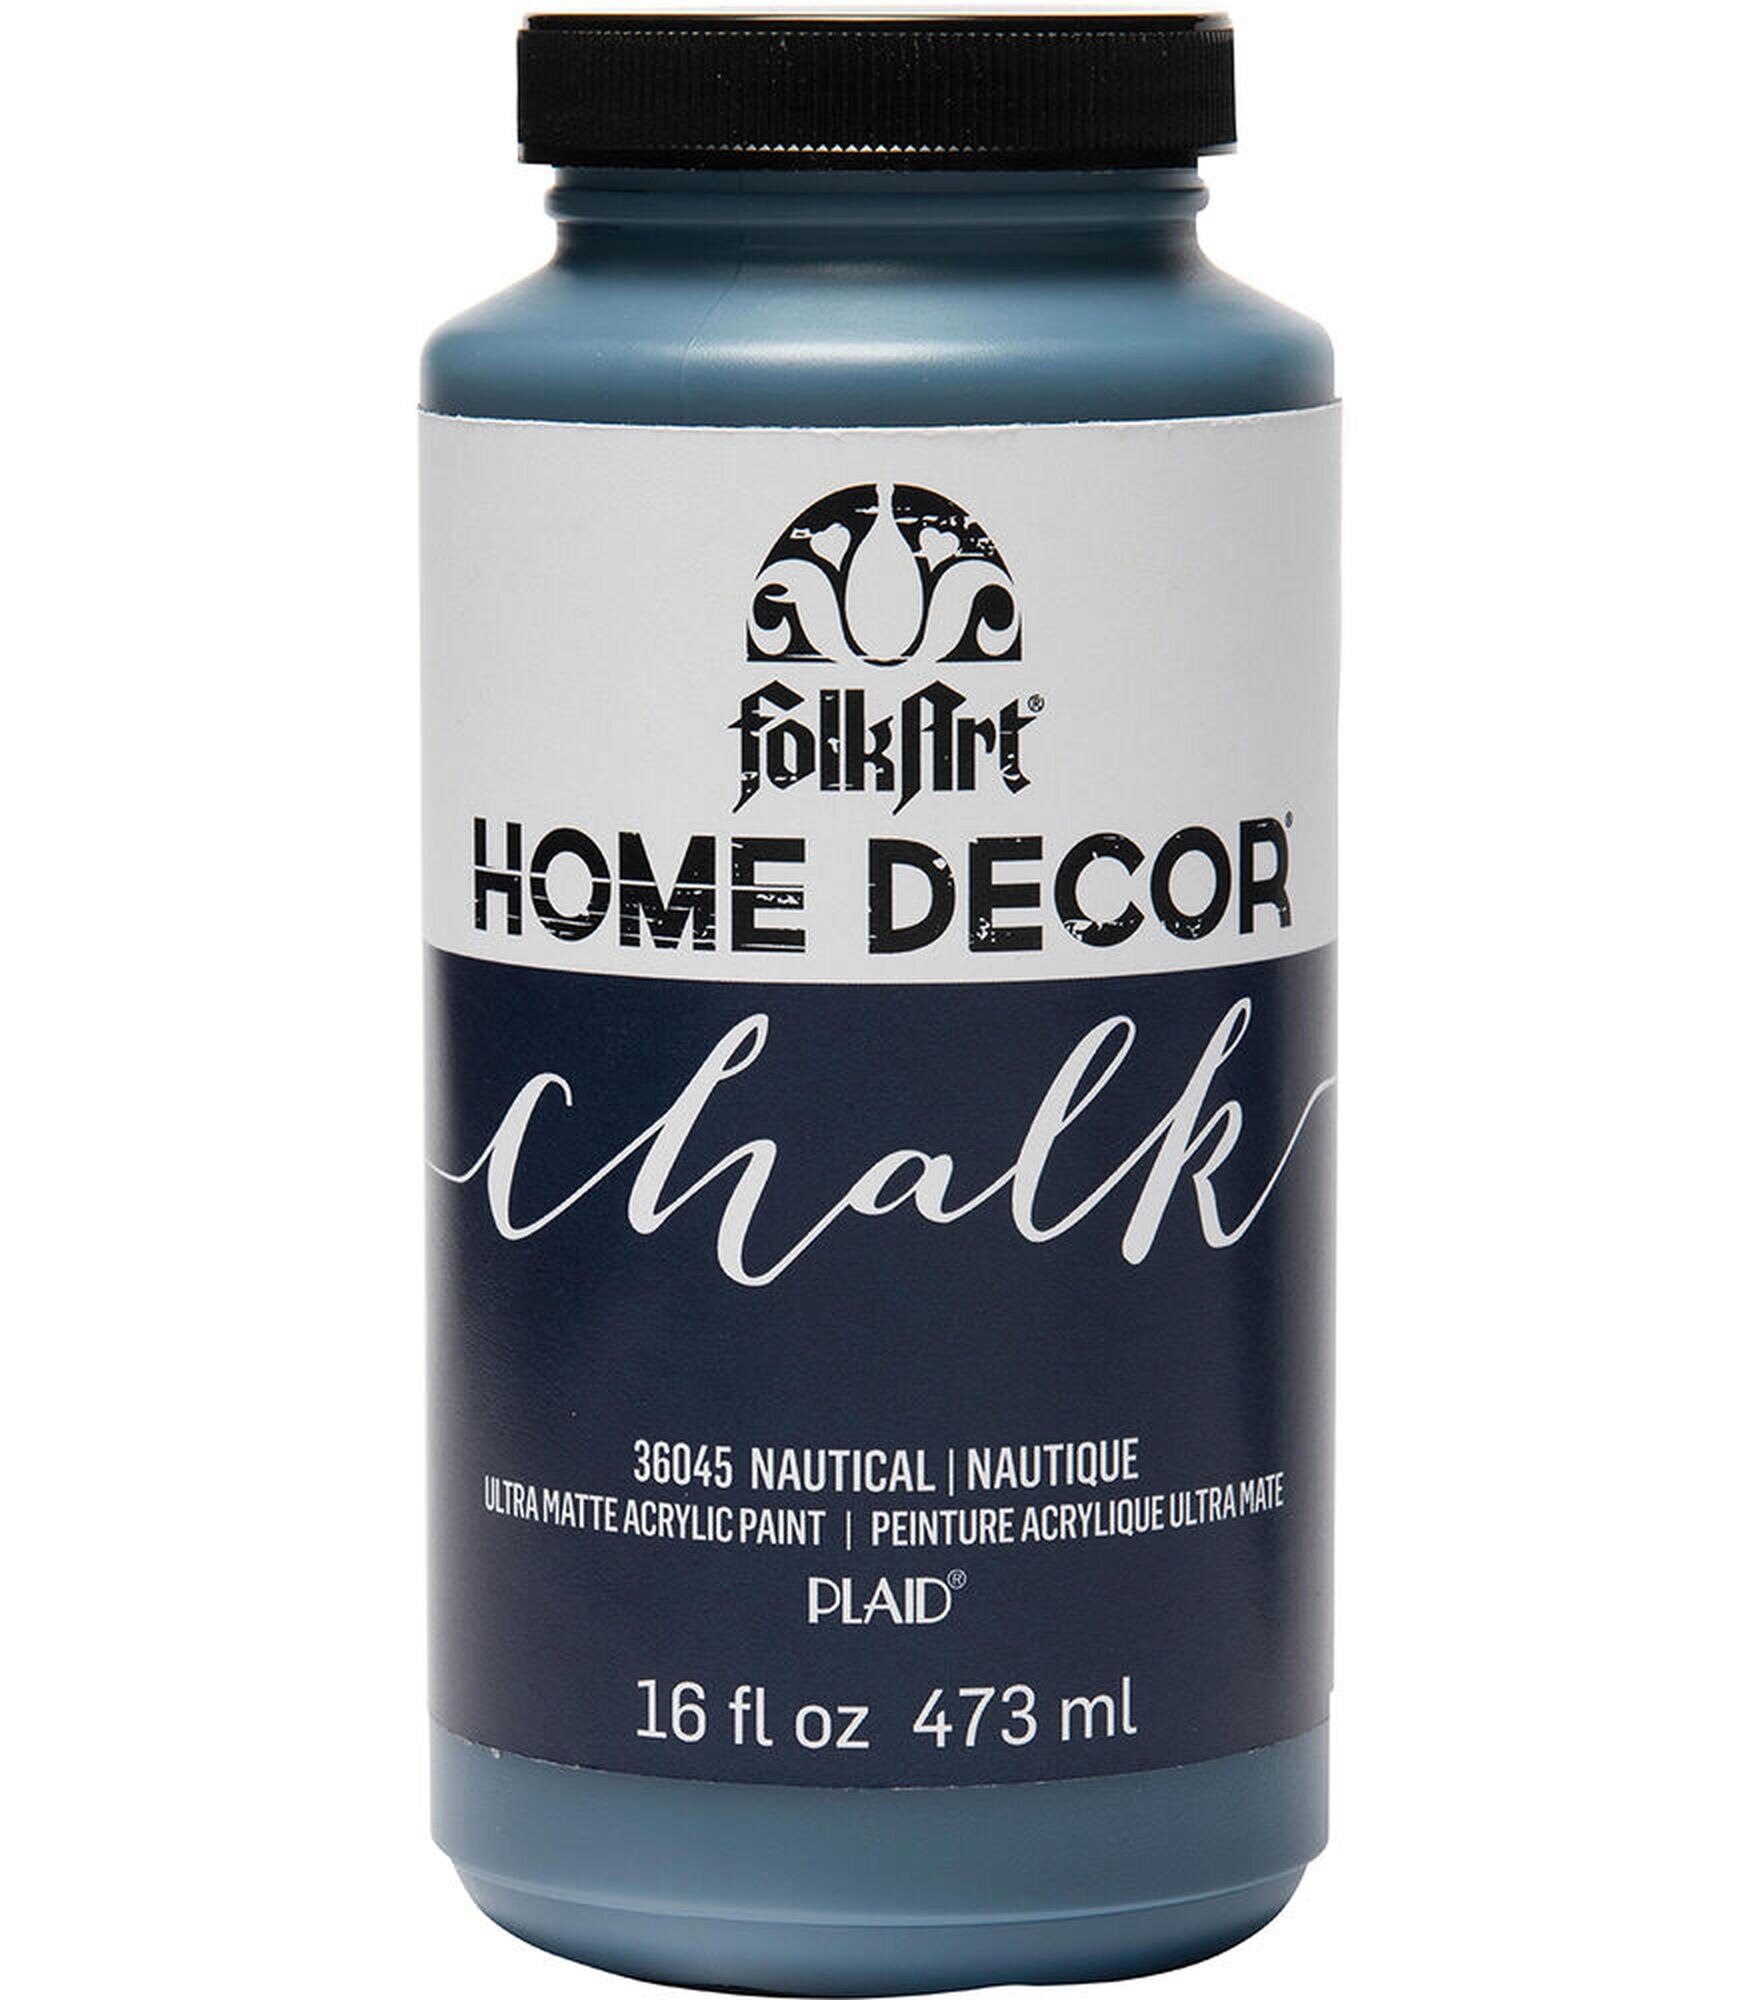 Albardon Deco Chalk Paint for Furniture, Home Decor, Crafts - All In One -  Matte Finish Paint - ([Coral] (8.5 oz))